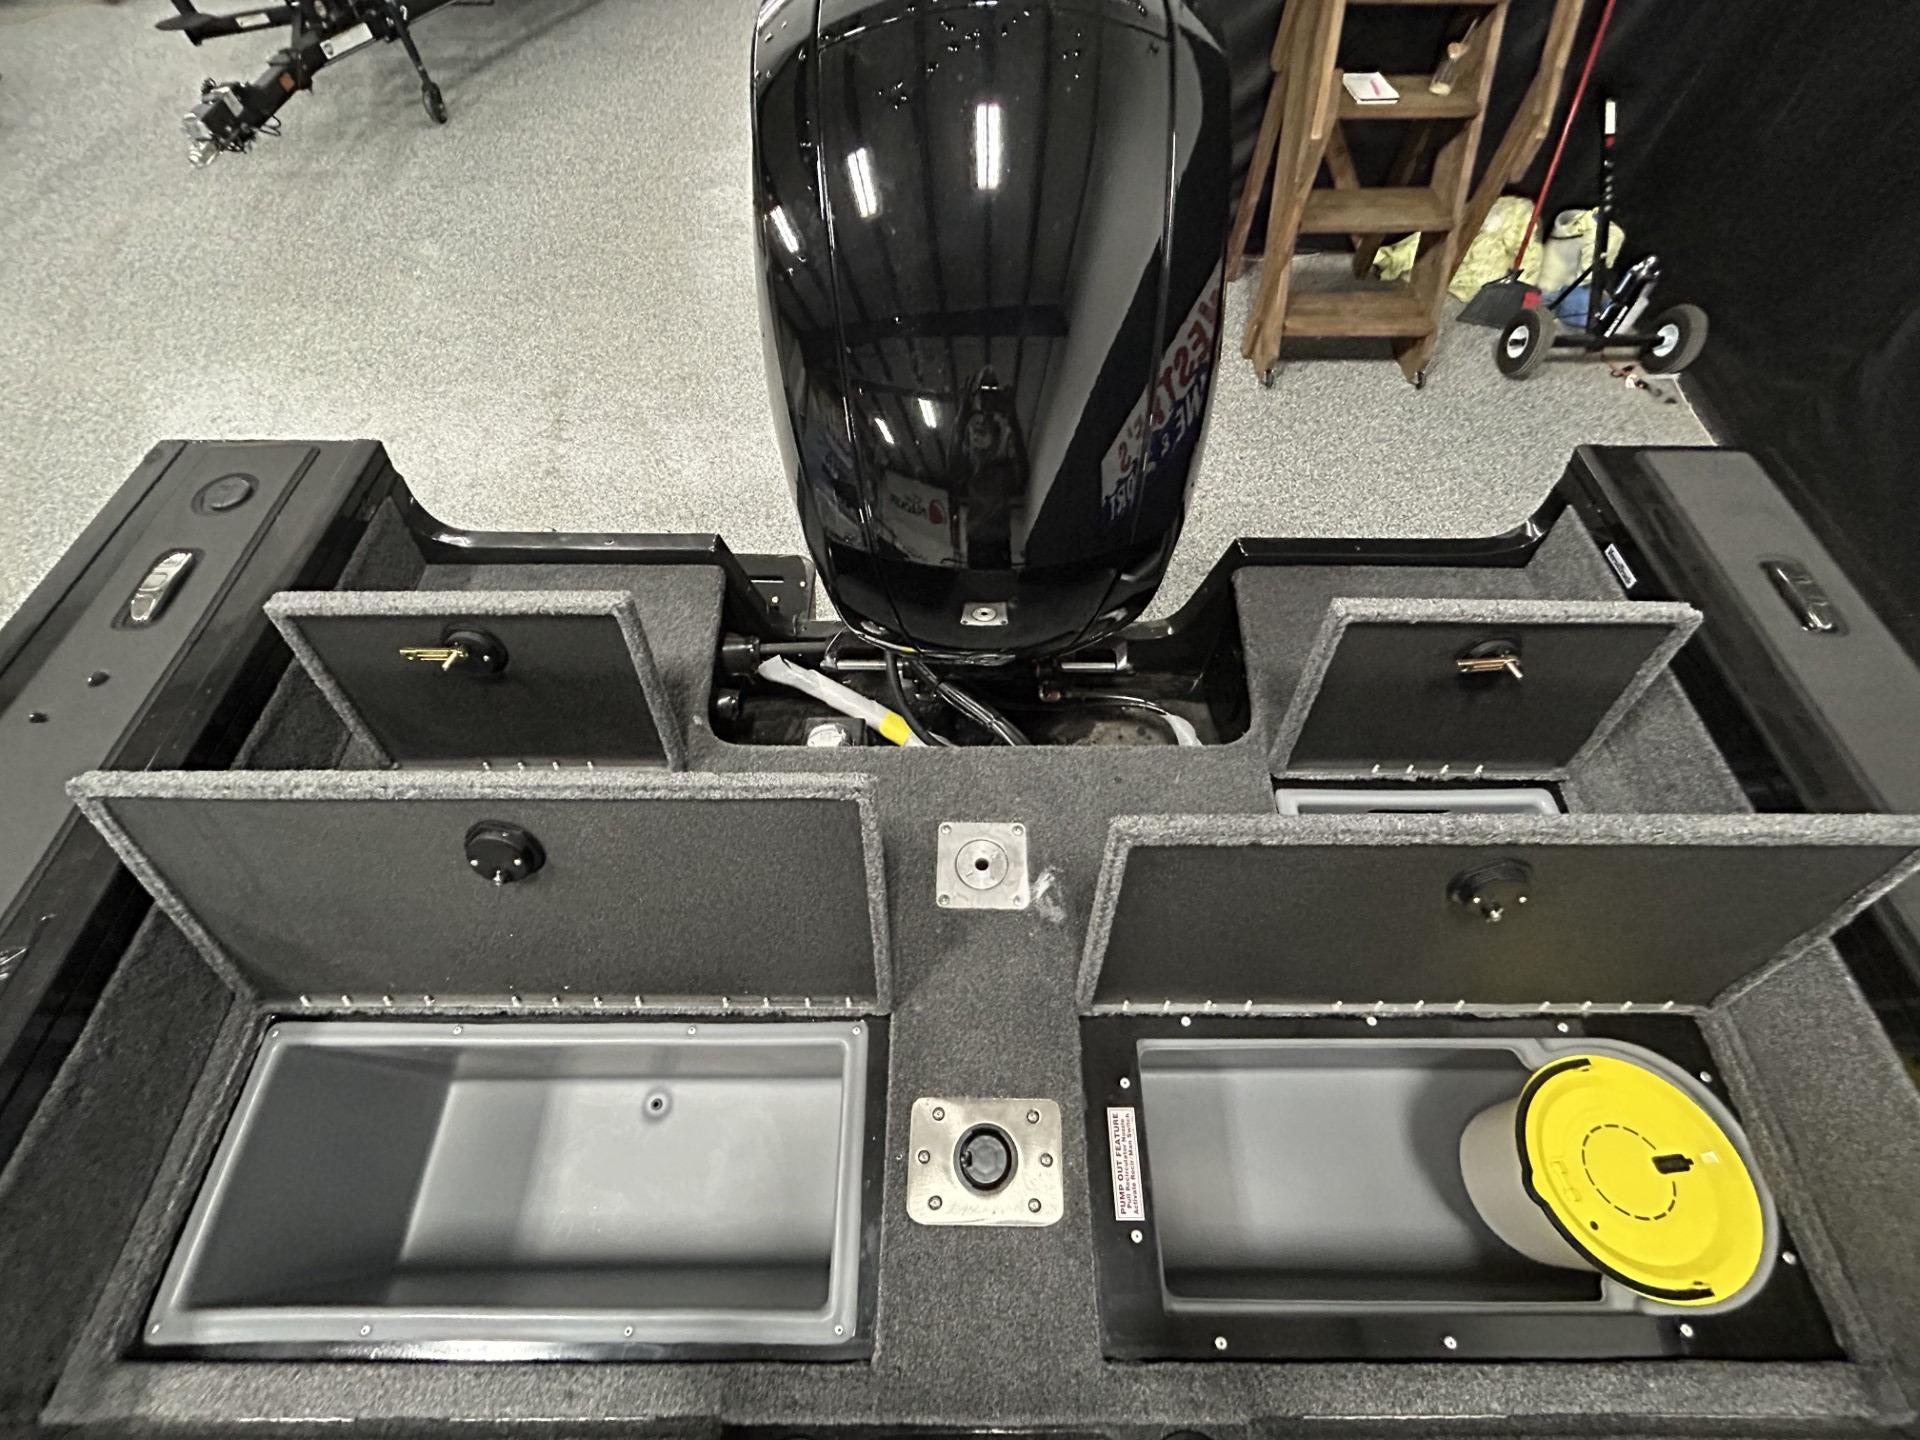 Helm & passenger seats w/molded storage boxes below & 2 fold-down